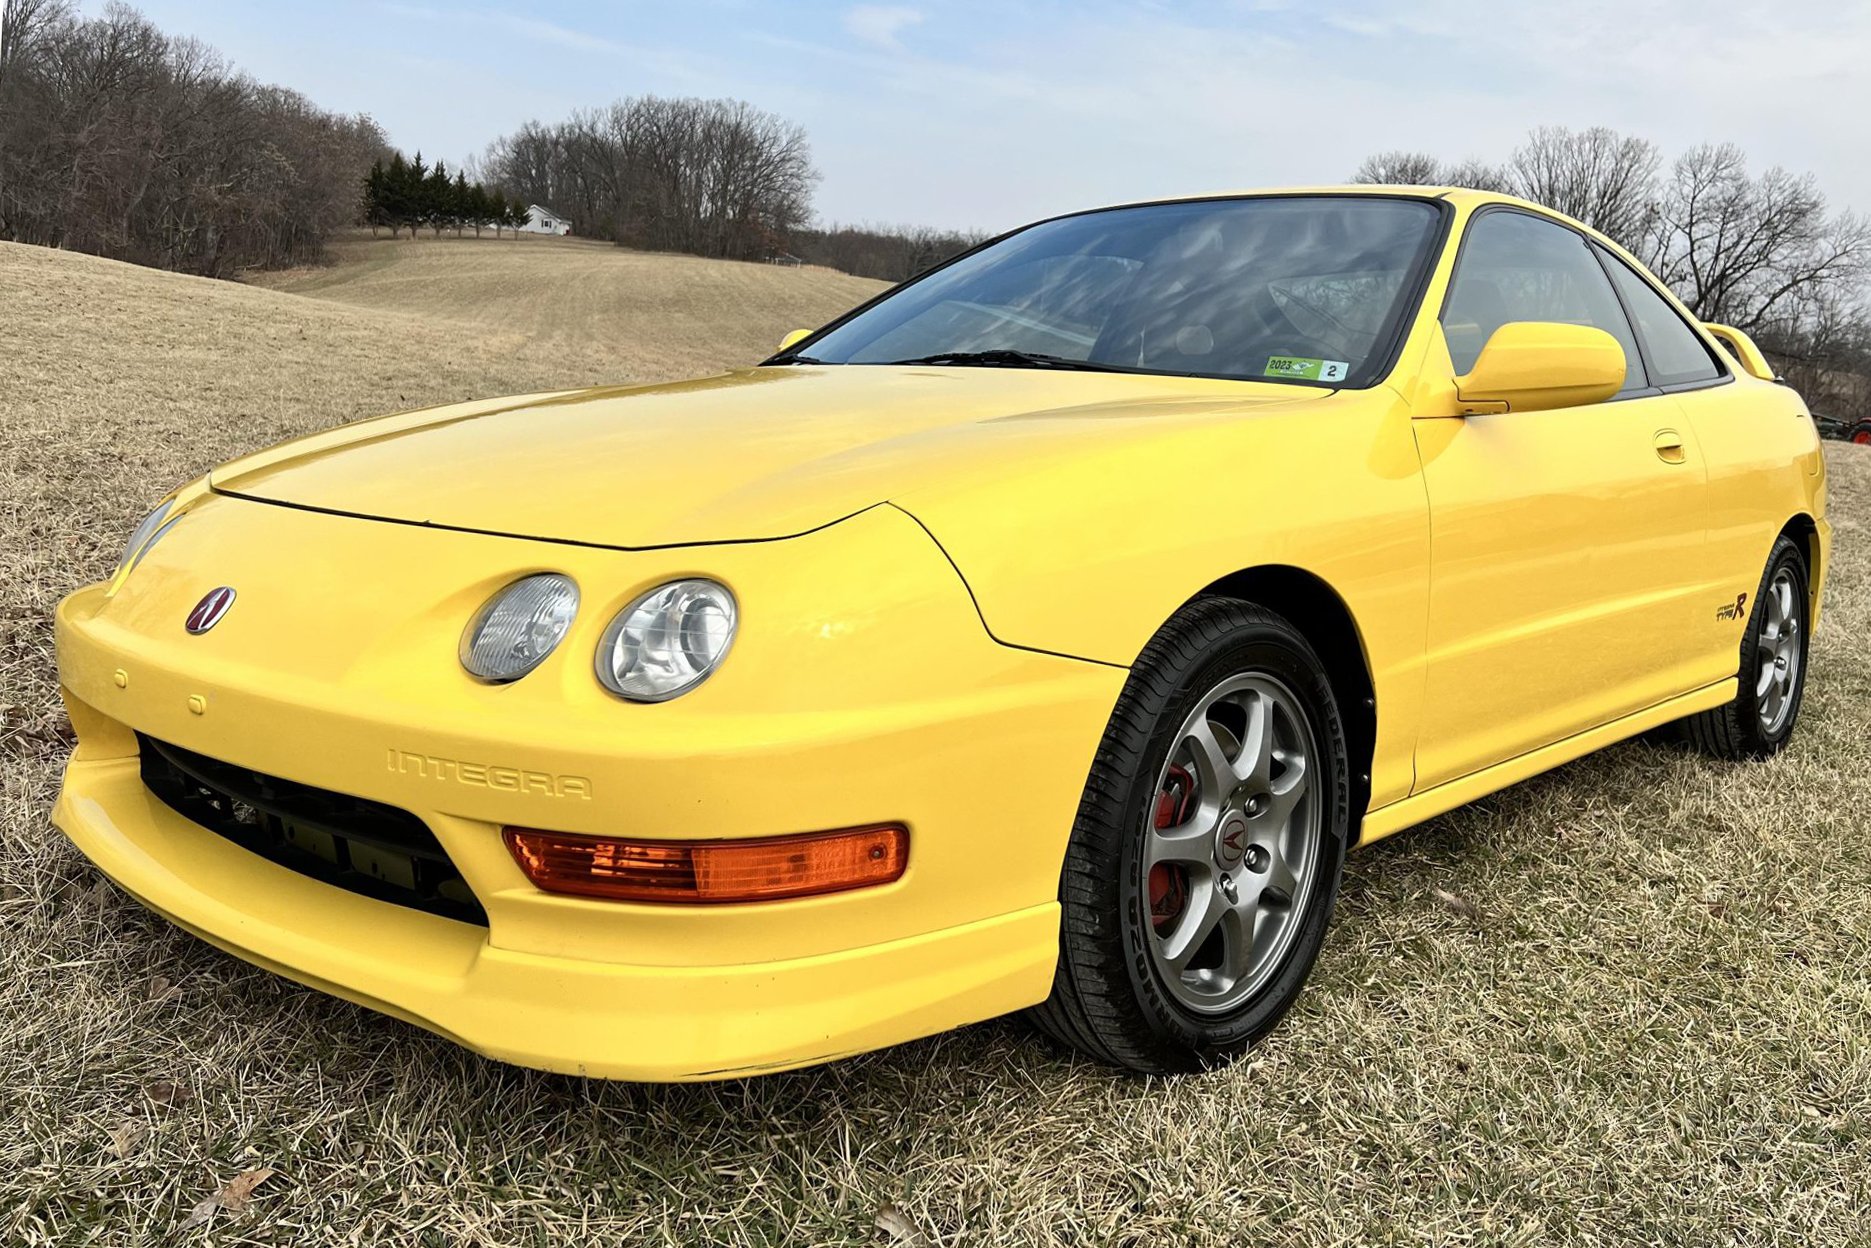 2001 Acura Integra Type R on Bring a Trailer | Acura Integra Forum - Yes  it's Back!